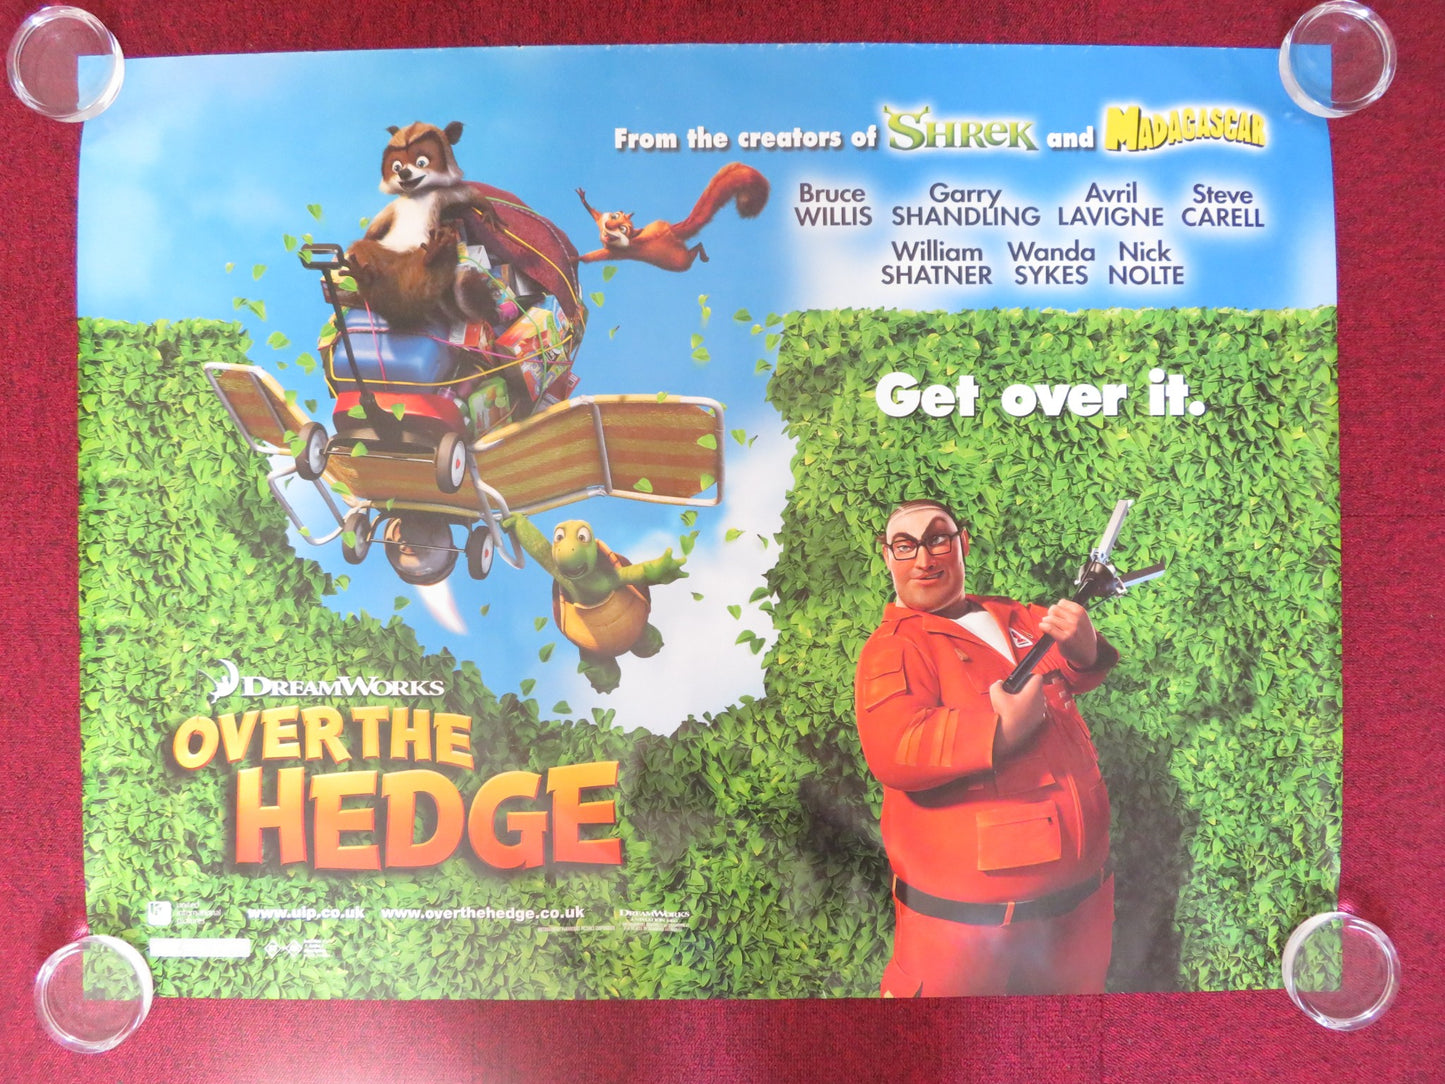 OVER THE HEDGE UK QUAD (30"x 40") ROLLED POSTER BRUCE WILLIS STEVE CARELL 2006